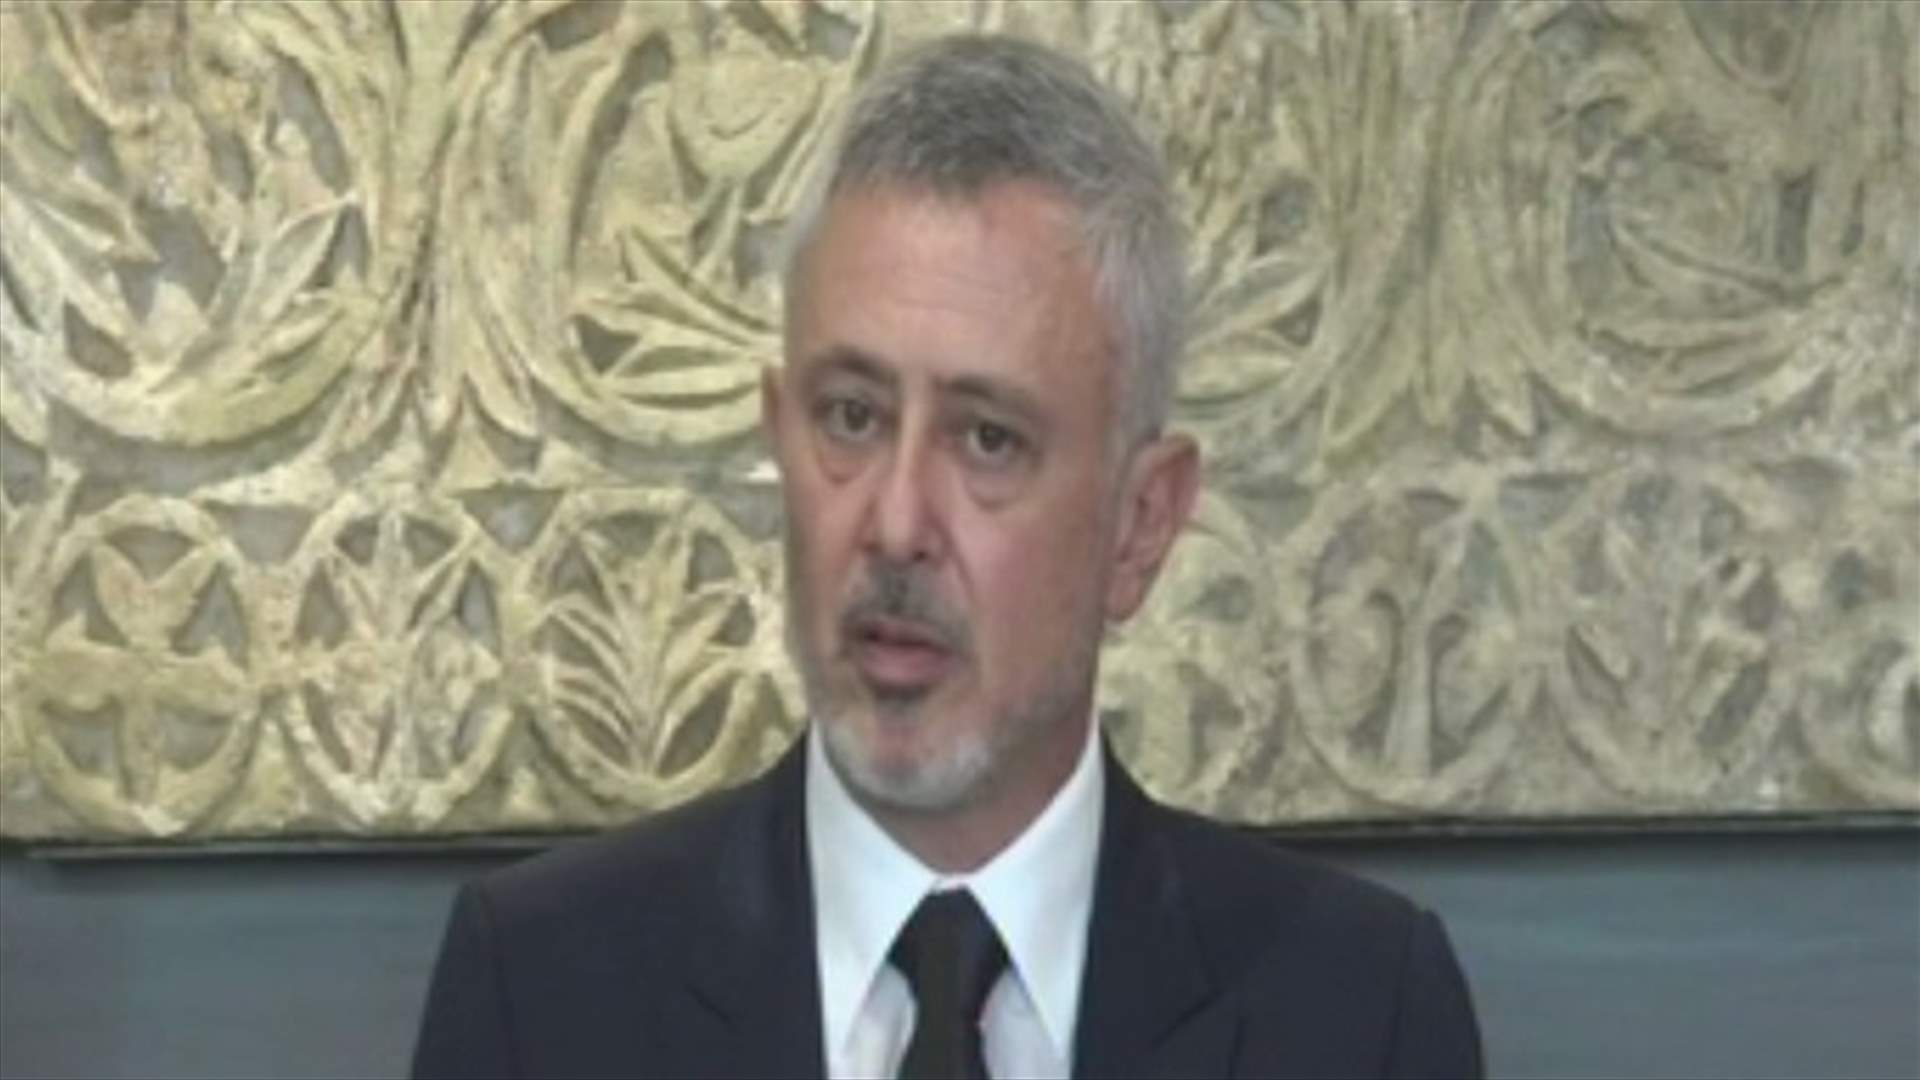 Frangieh from Ain al-Tineh: The army, the people and the resistance form my political project